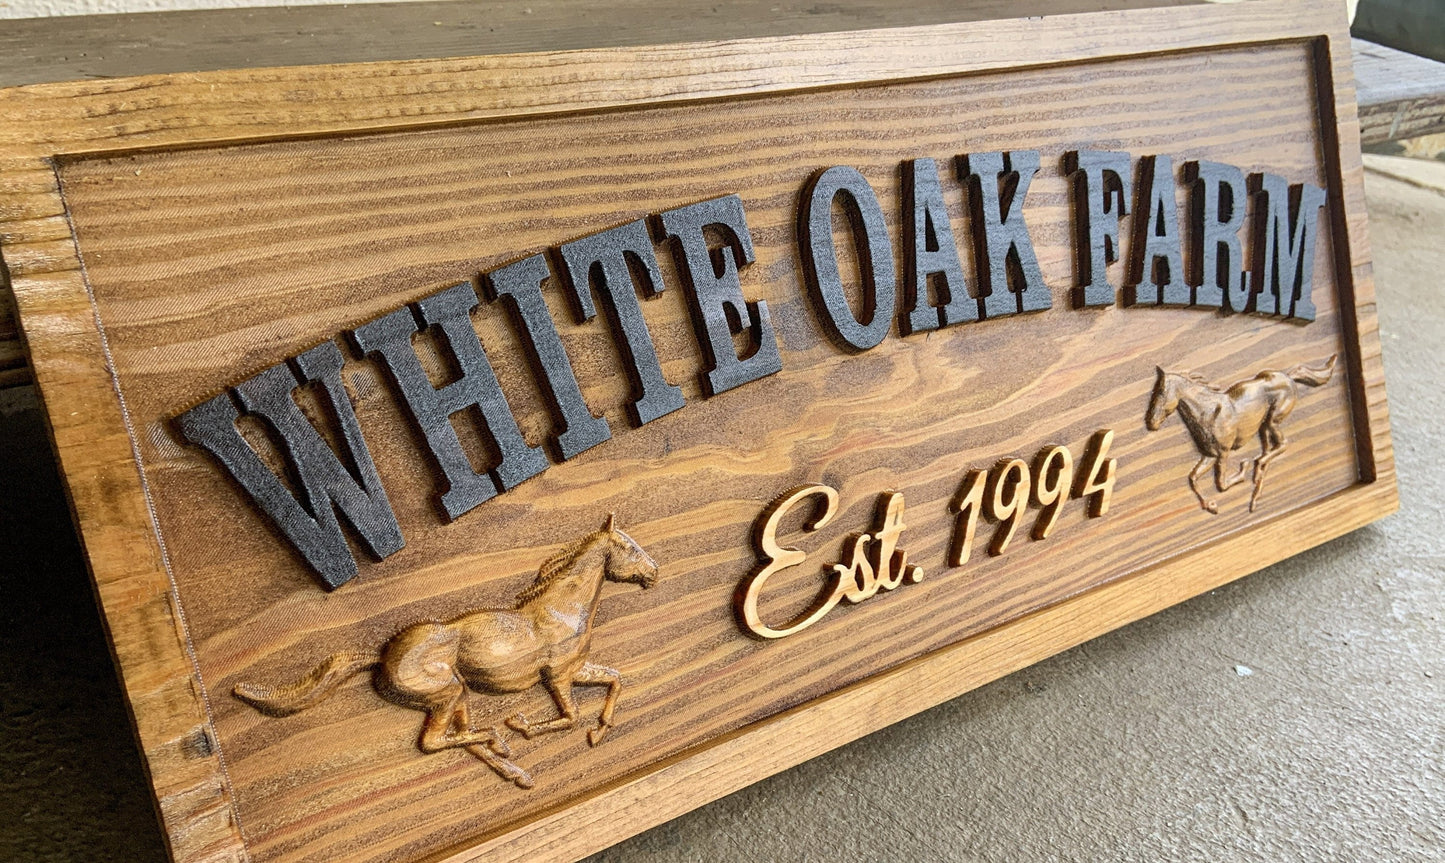 Ranch Farm 3D Wood Sign for Stables